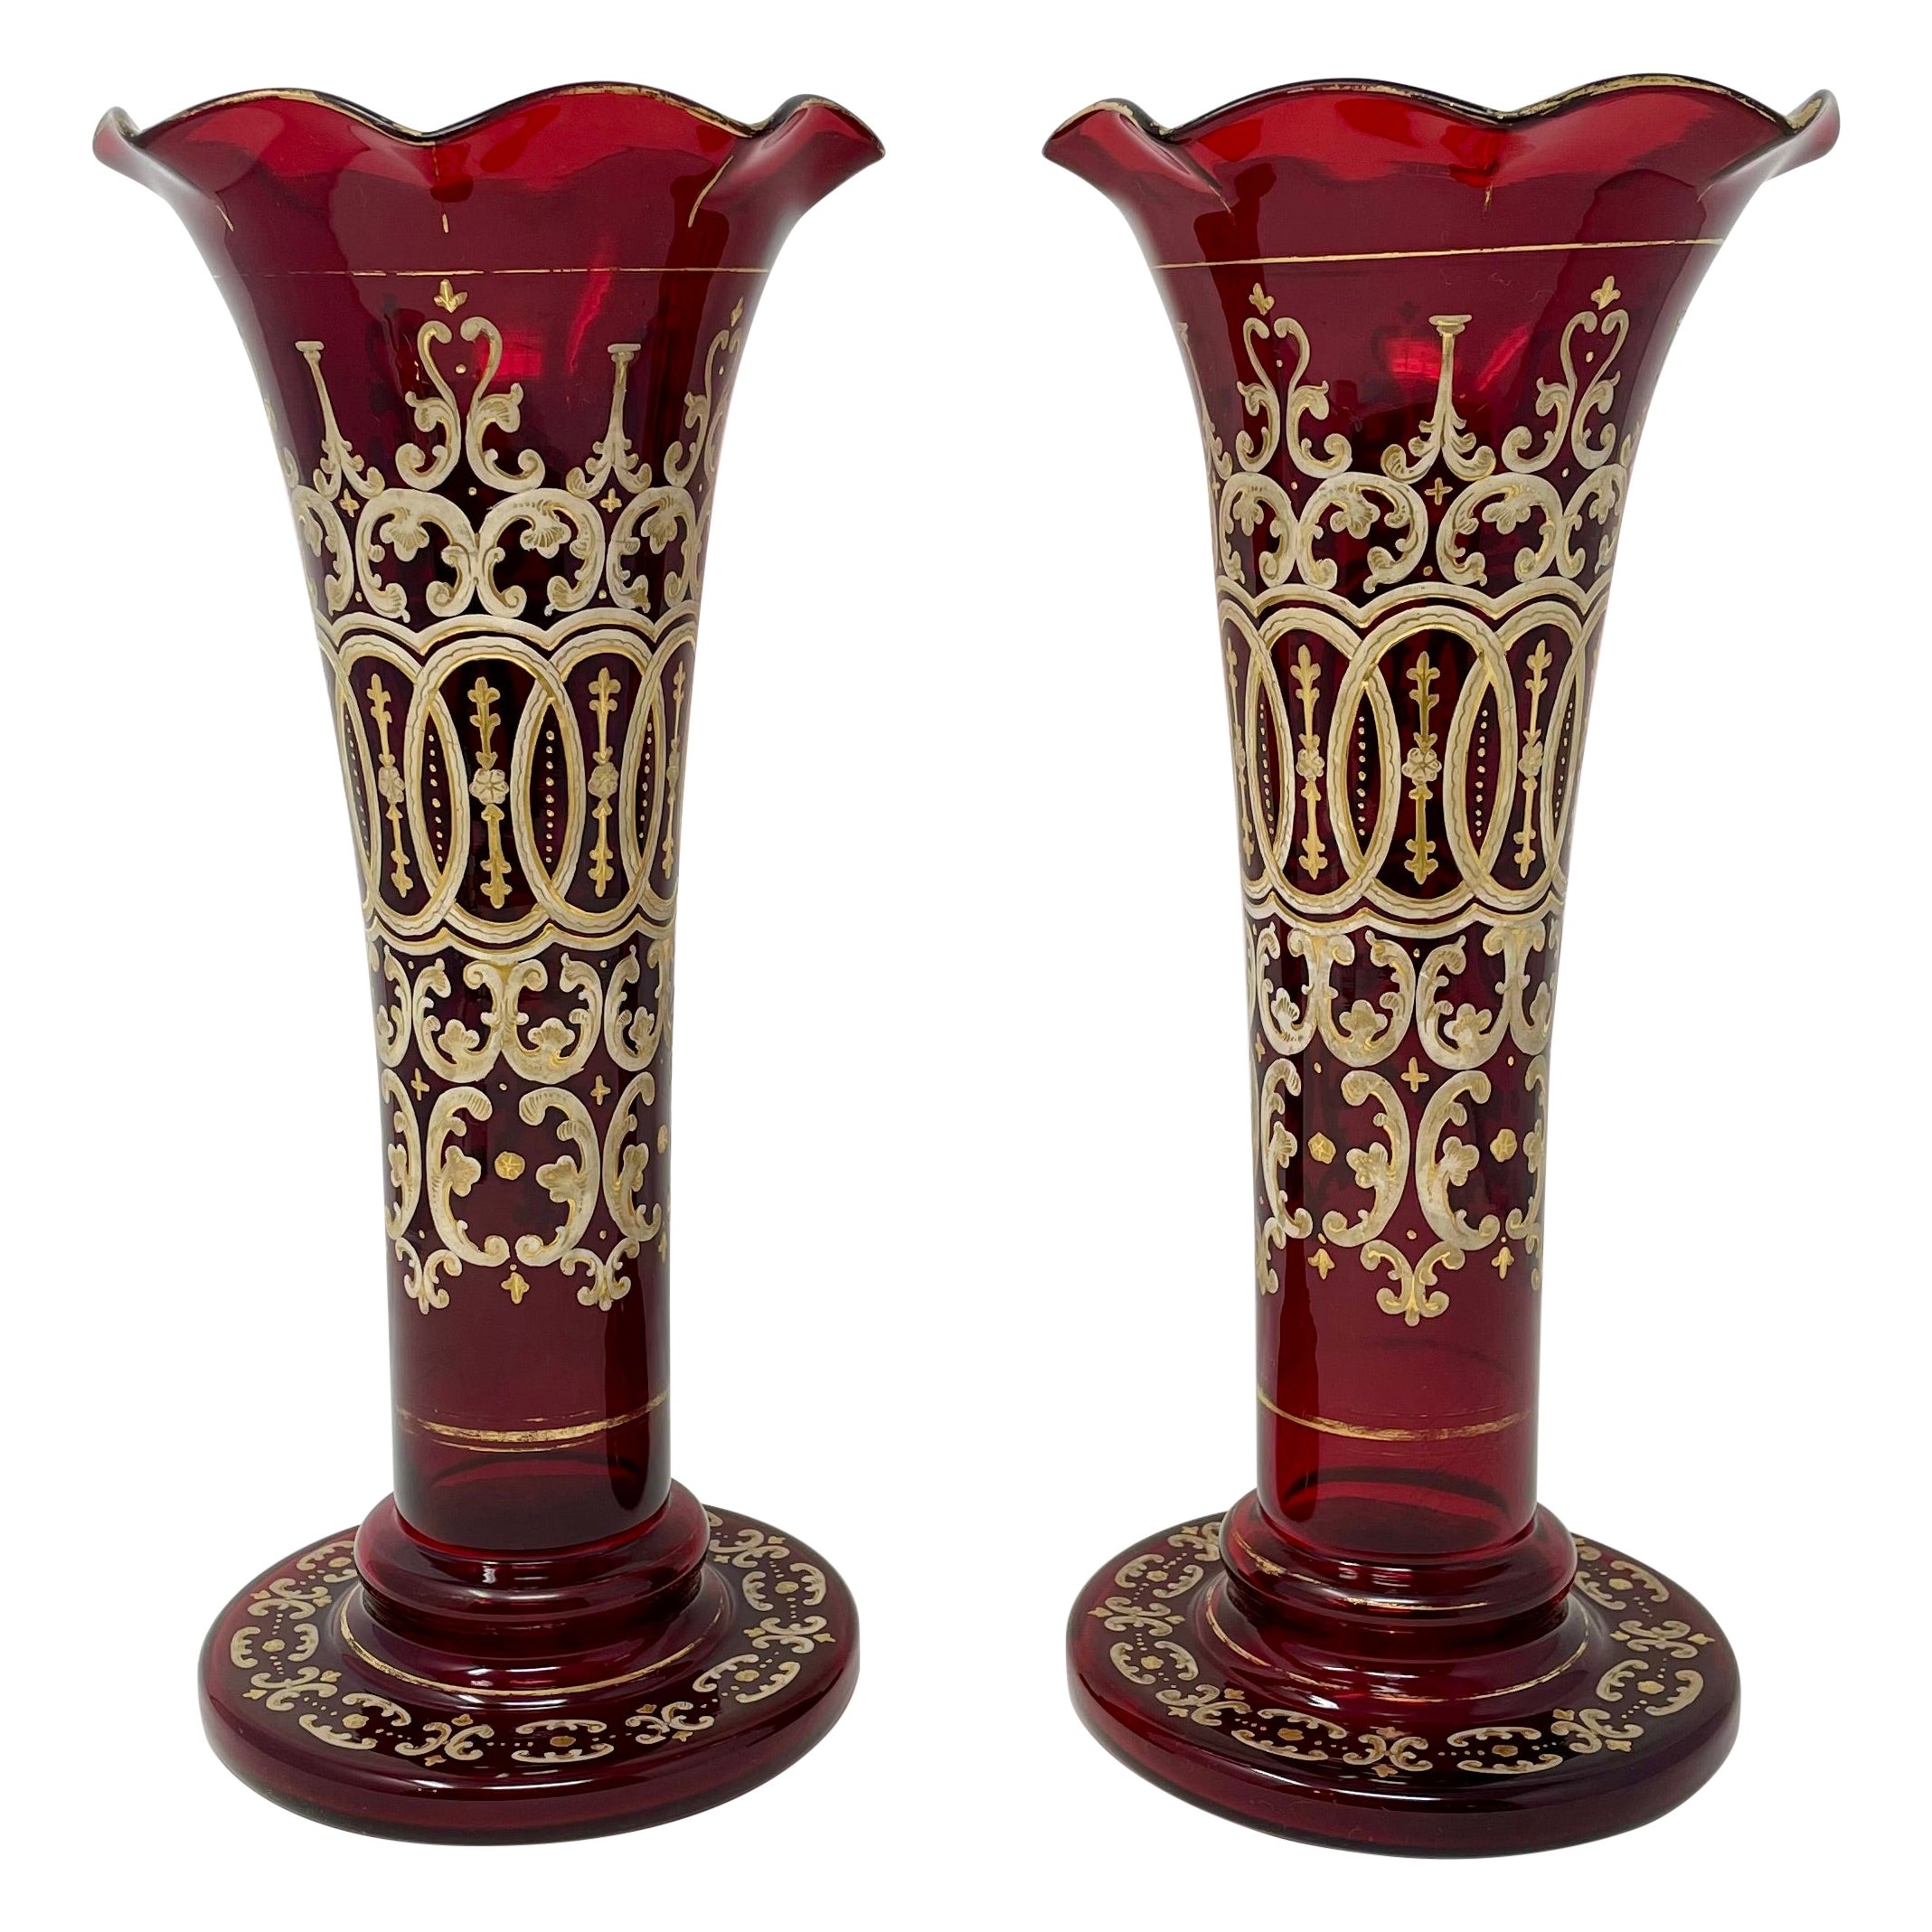 Pair Antique Ruby Glass Vases with Hand-Painted Gold Details, Circa 1890. For Sale